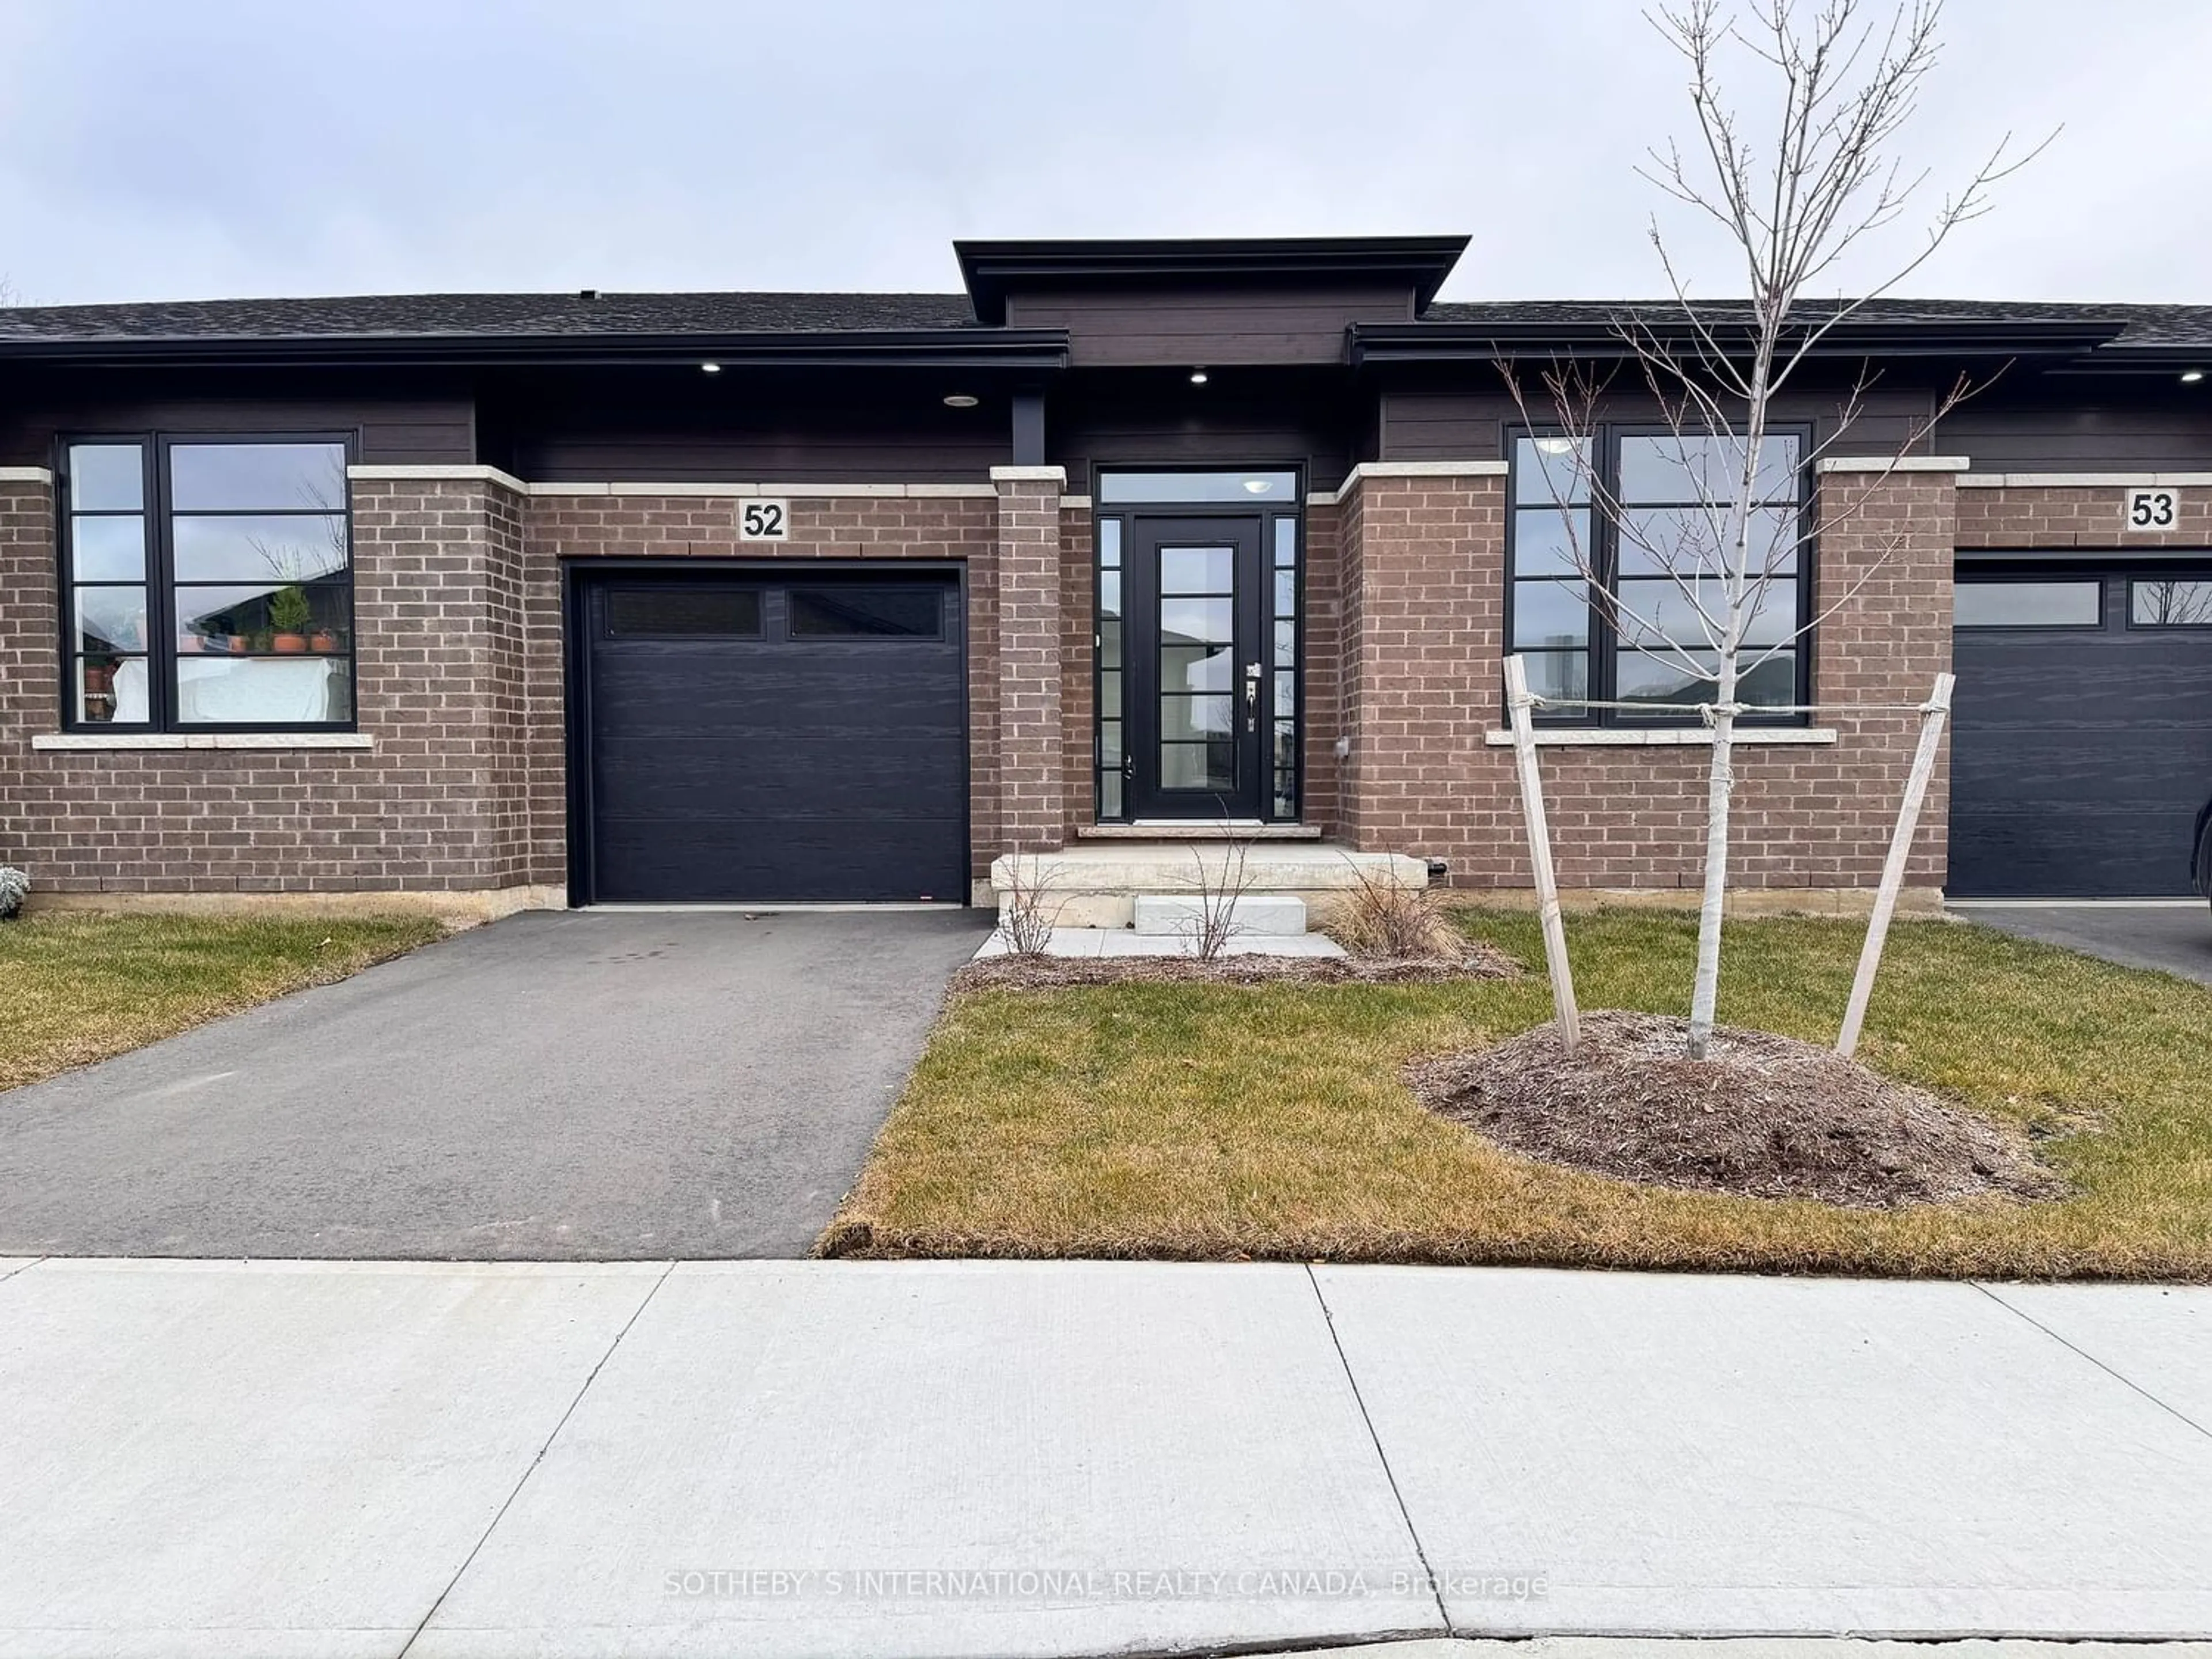 Home with brick exterior material for 550 Grey St #52, Brantford Ontario N3S 0C4